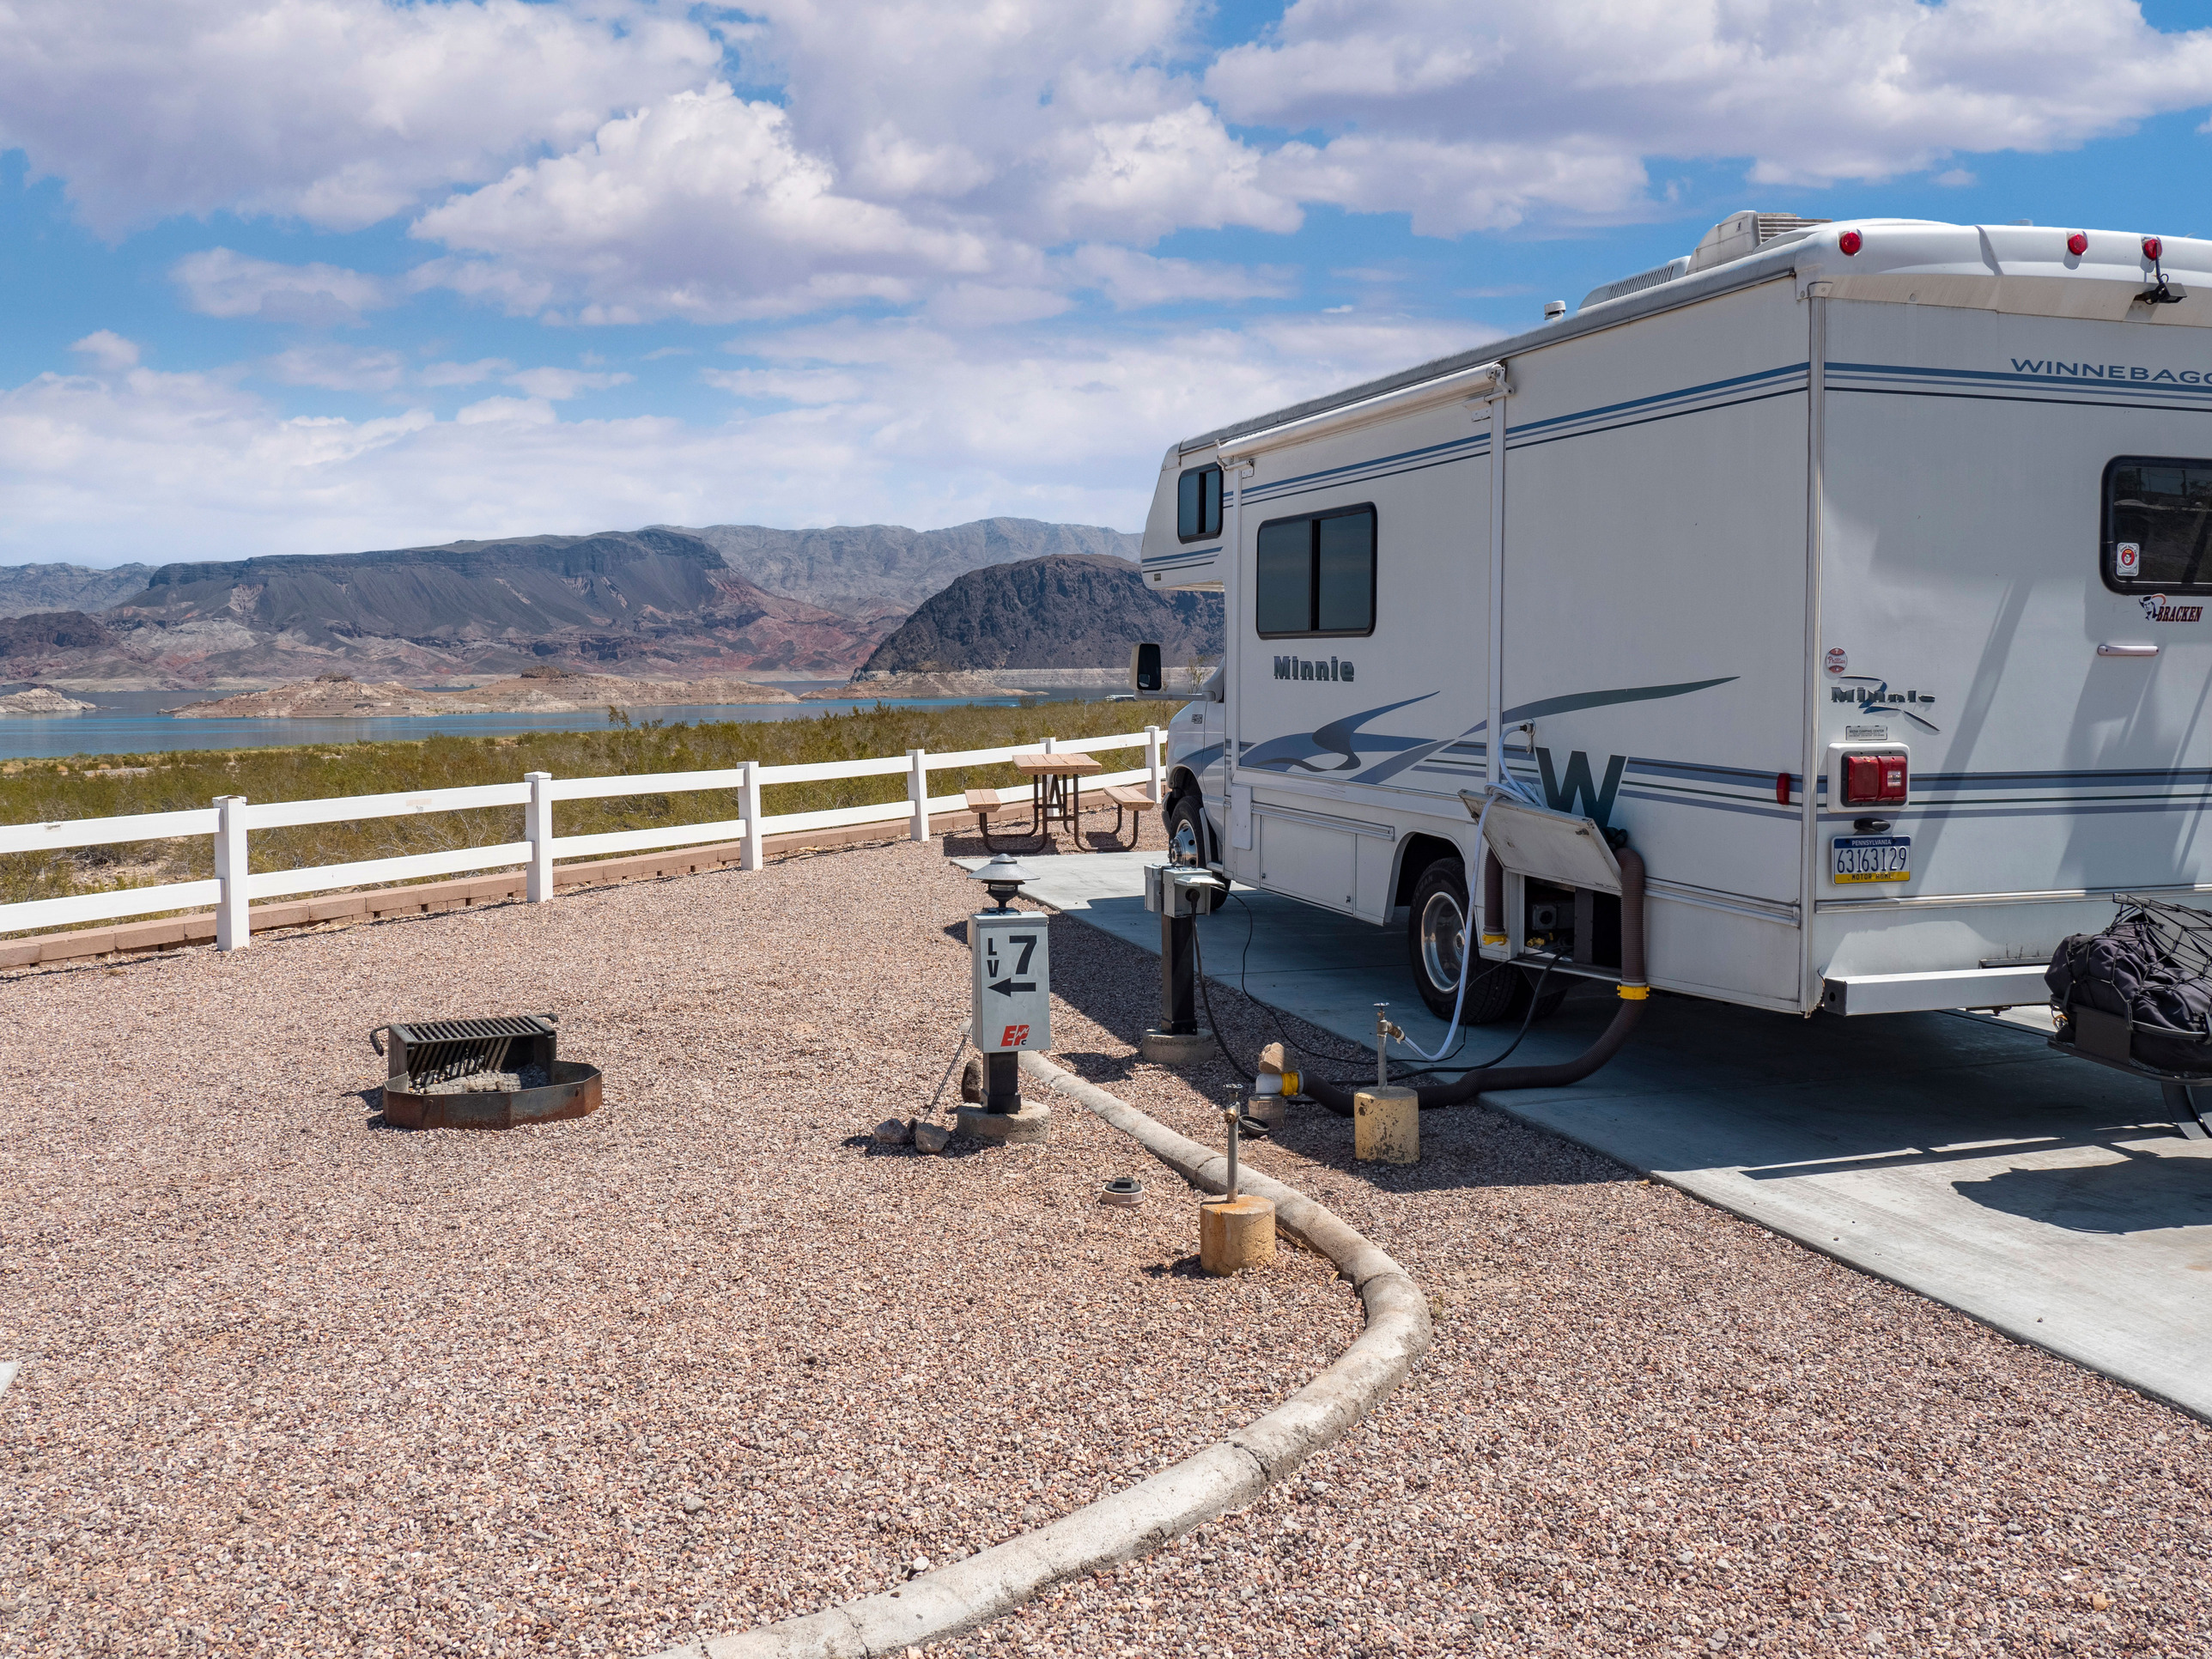 RV on cement pad overlooking mountains and lake